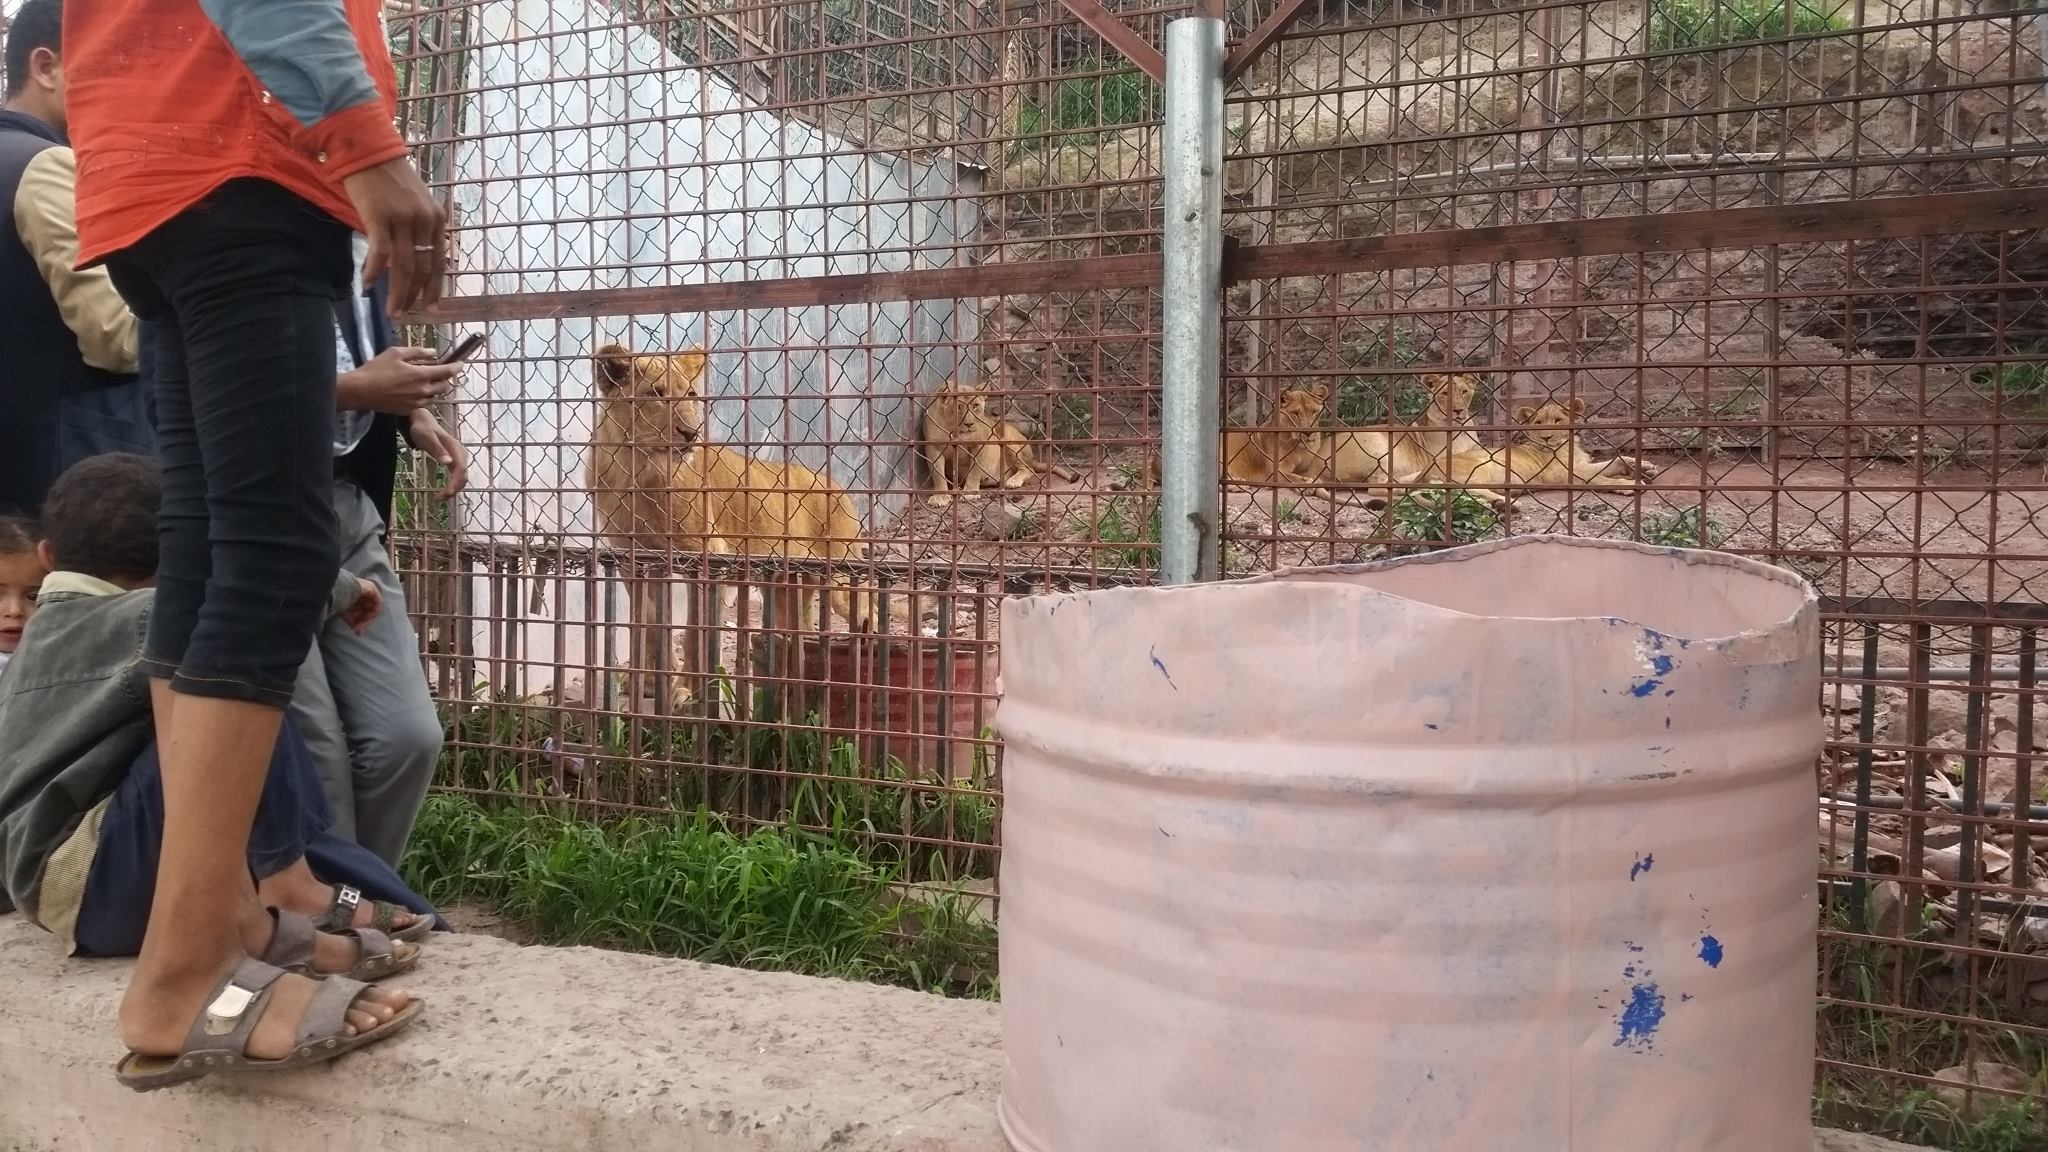 Ibb Zoo Emergency rescue Mission water pail for the lions 9 July 2017 KMB.jpg